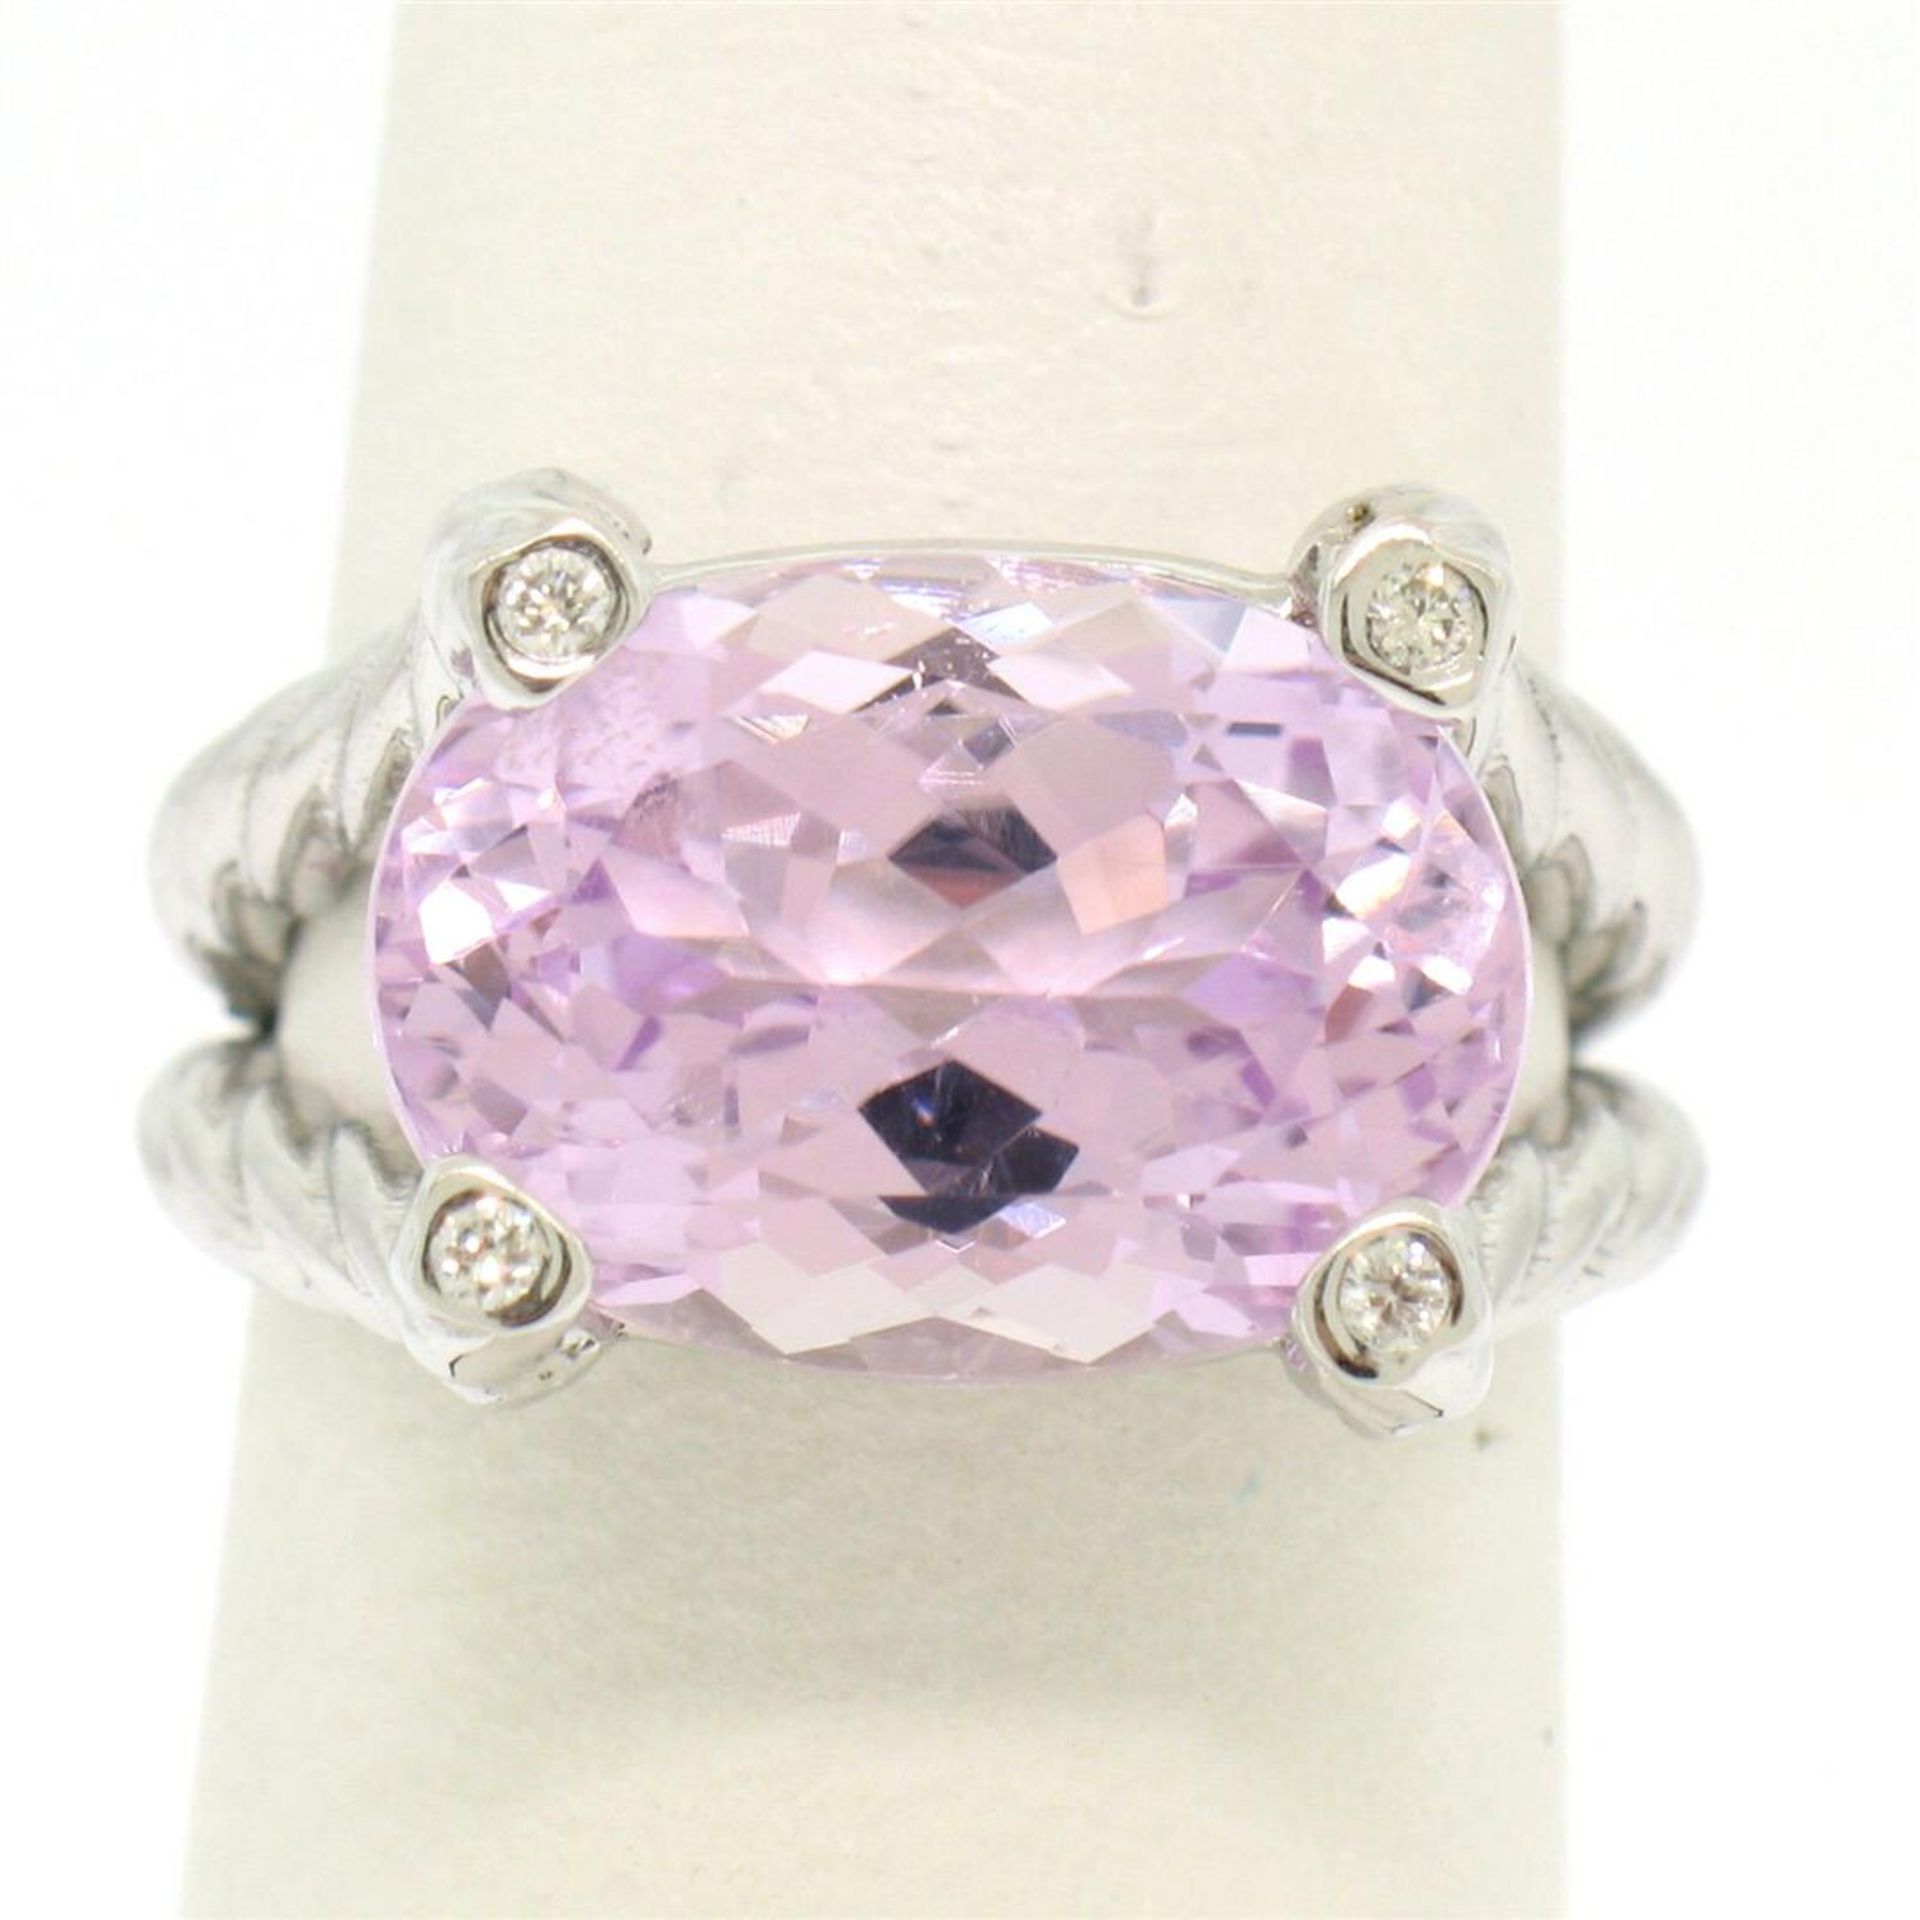 14k White Gold Twisted Cable 8.5 ct Oval Kunzite Solitaire Ring 4 Diamond Accent